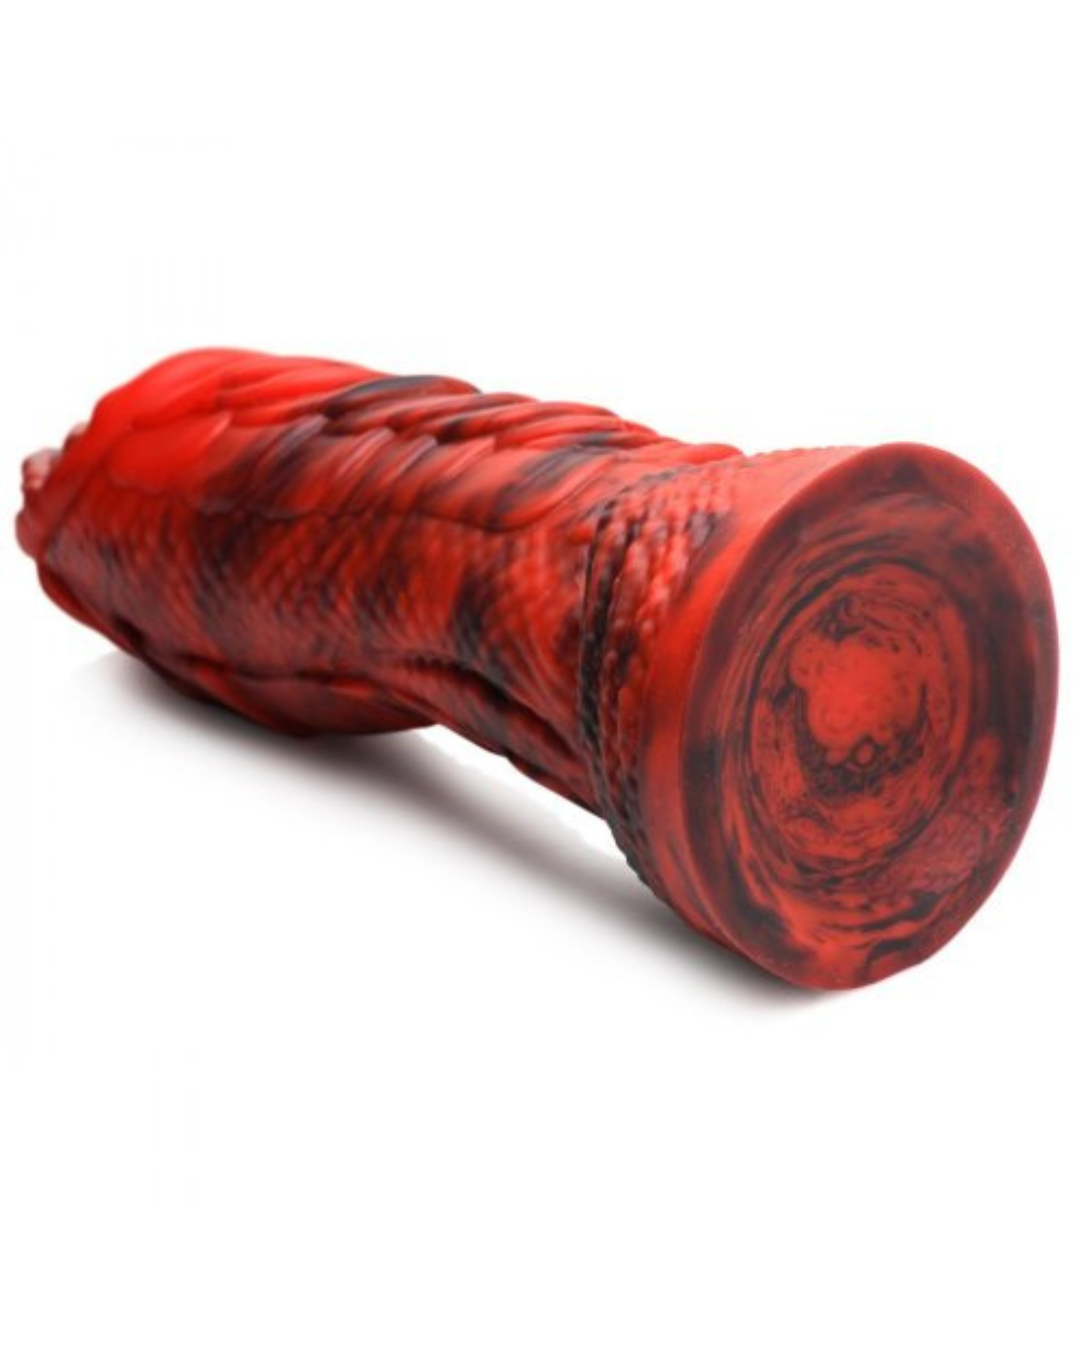 Fire Dragon Red Scaly Silicone Dildo on a white background showing suction cup